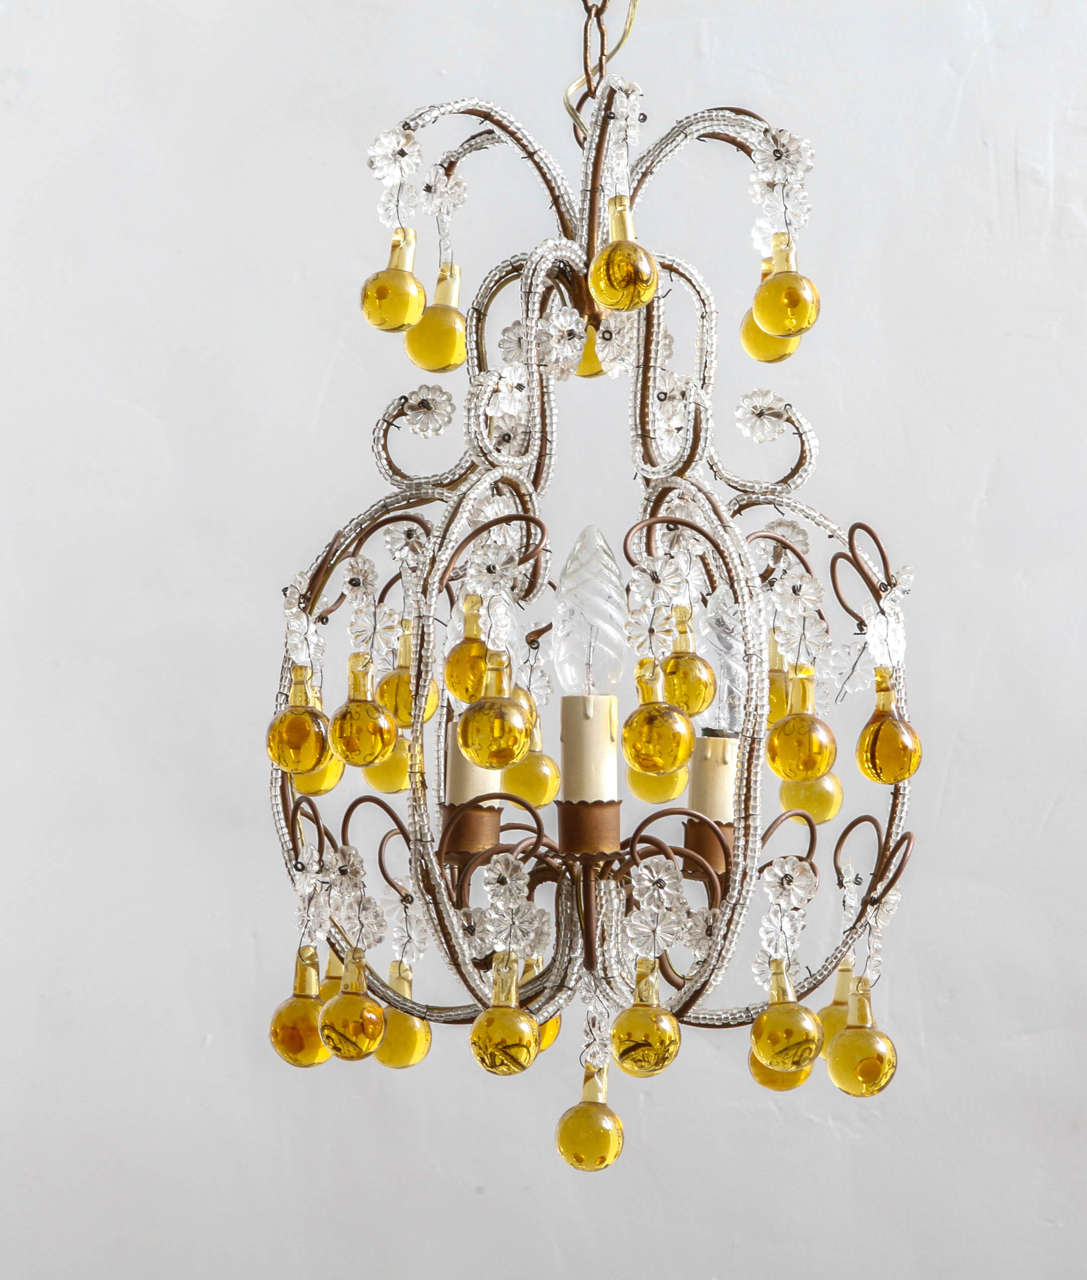 French brass and crystal chandelier, circa 1920s. Beading clear crystal and flower glasses along brass frame with large yellow tear-drops.